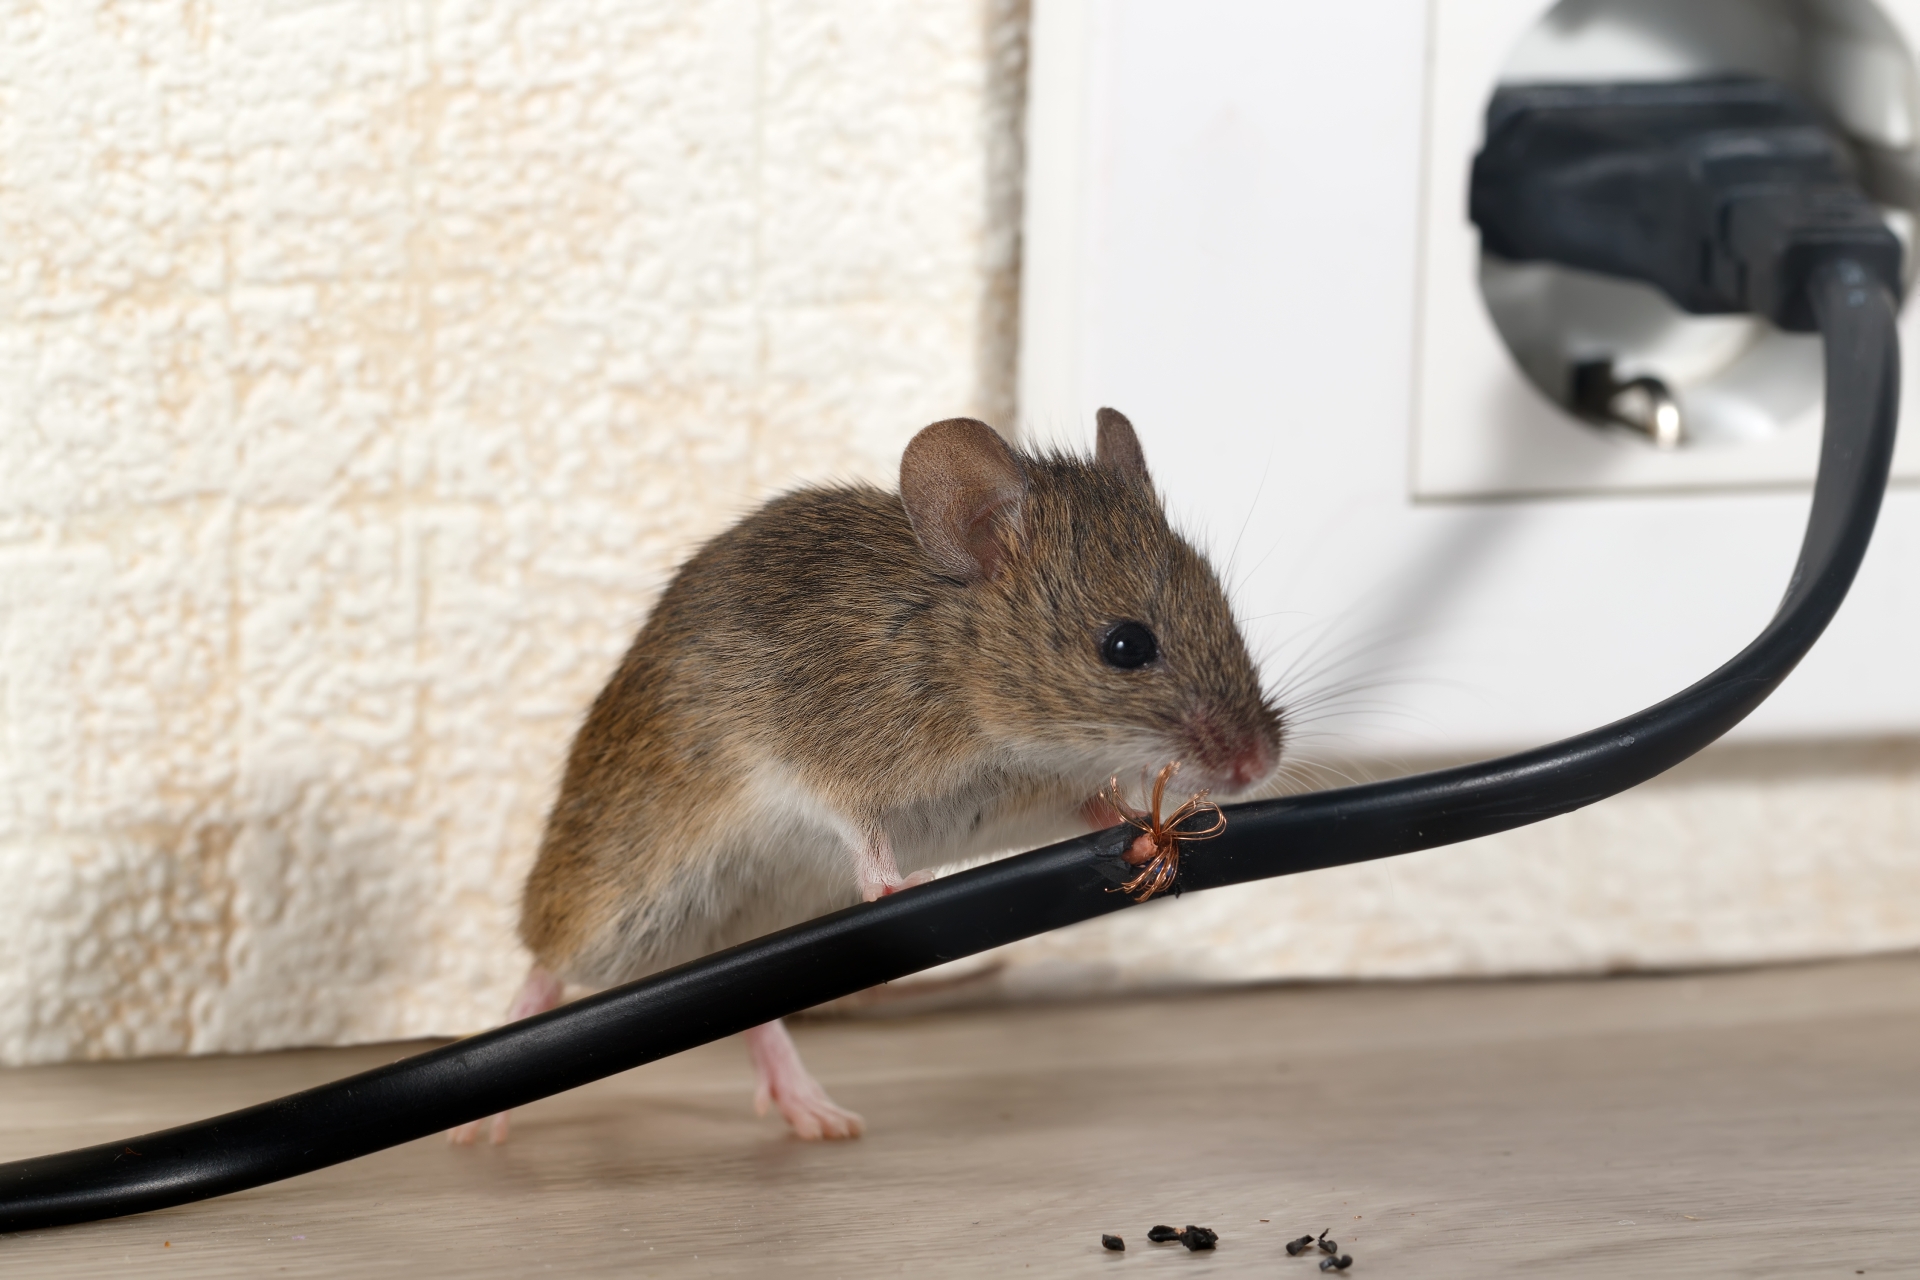 Mice Infestation, Pest Control in North Finchley, Woodside Park, N12. Call Now 020 8166 9746